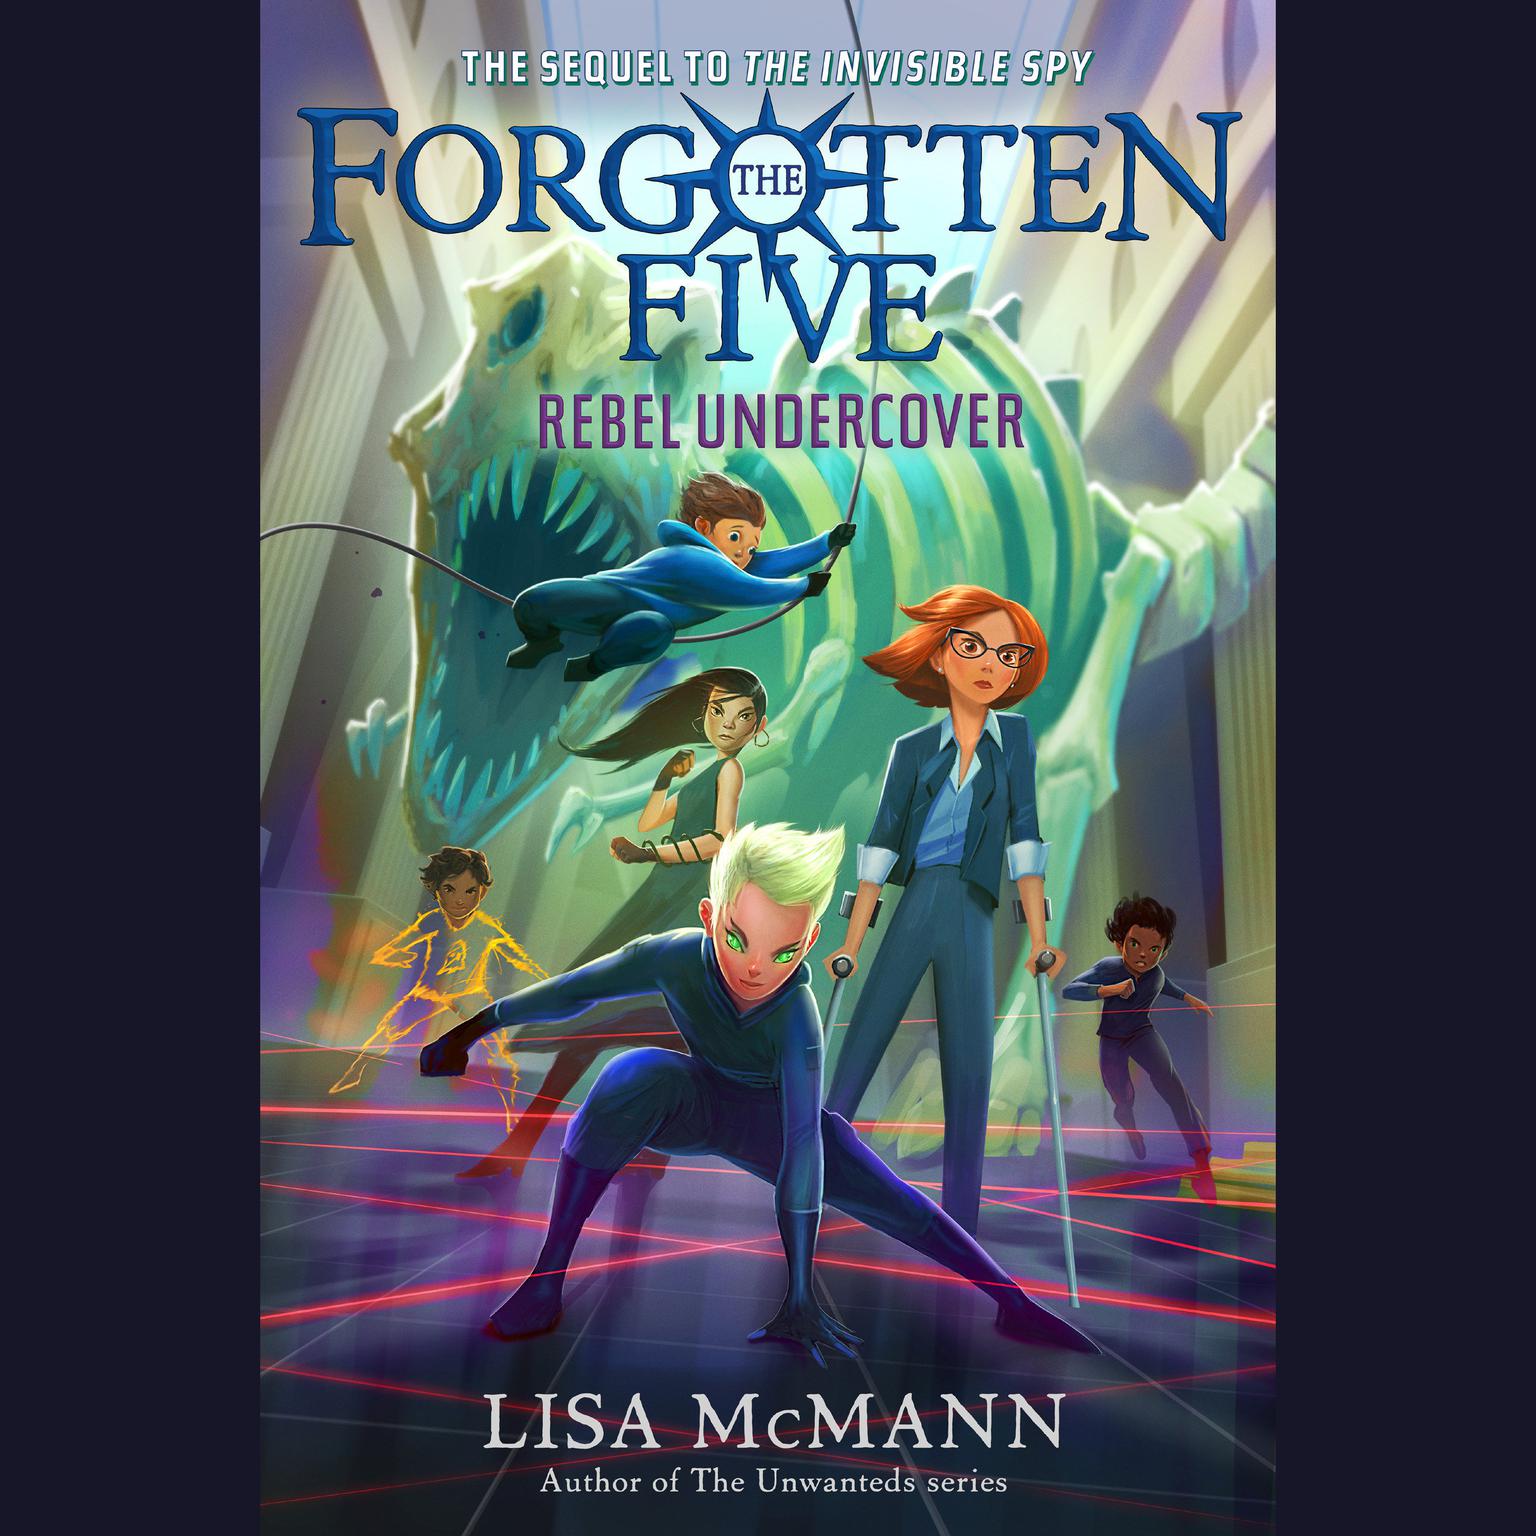 Rebel Undercover (The Forgotten Five, Book 3) Audiobook, by Lisa McMann